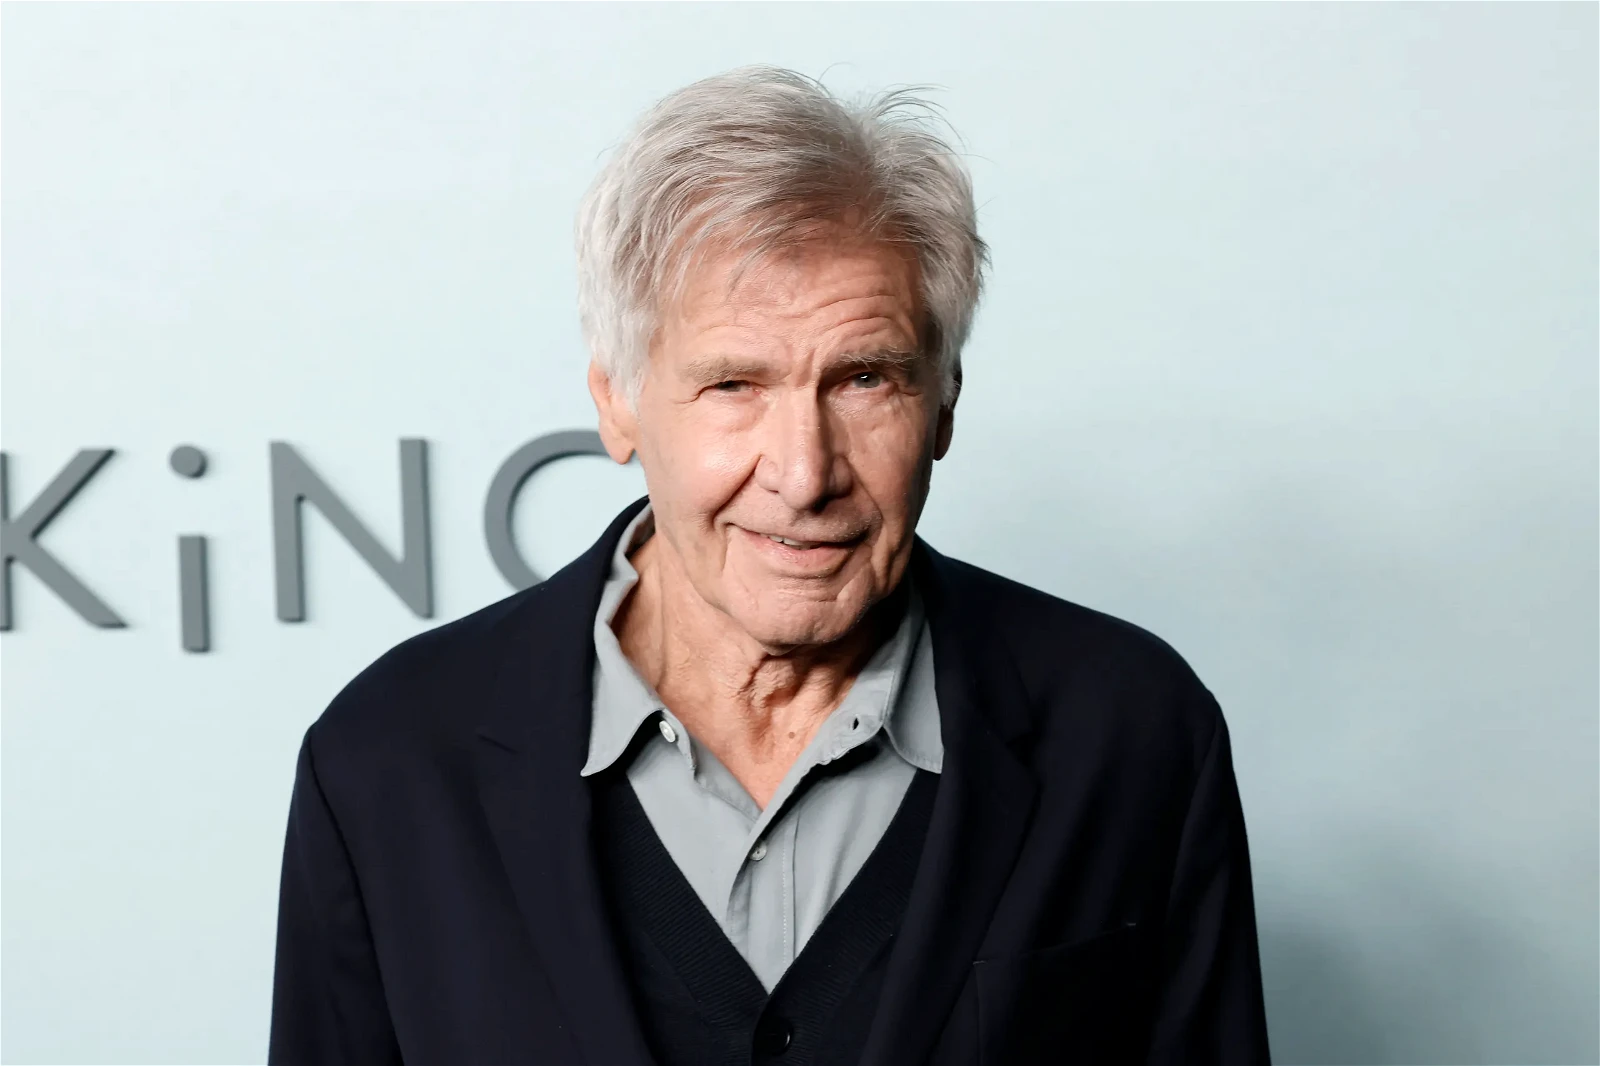 Harrison Ford at an event